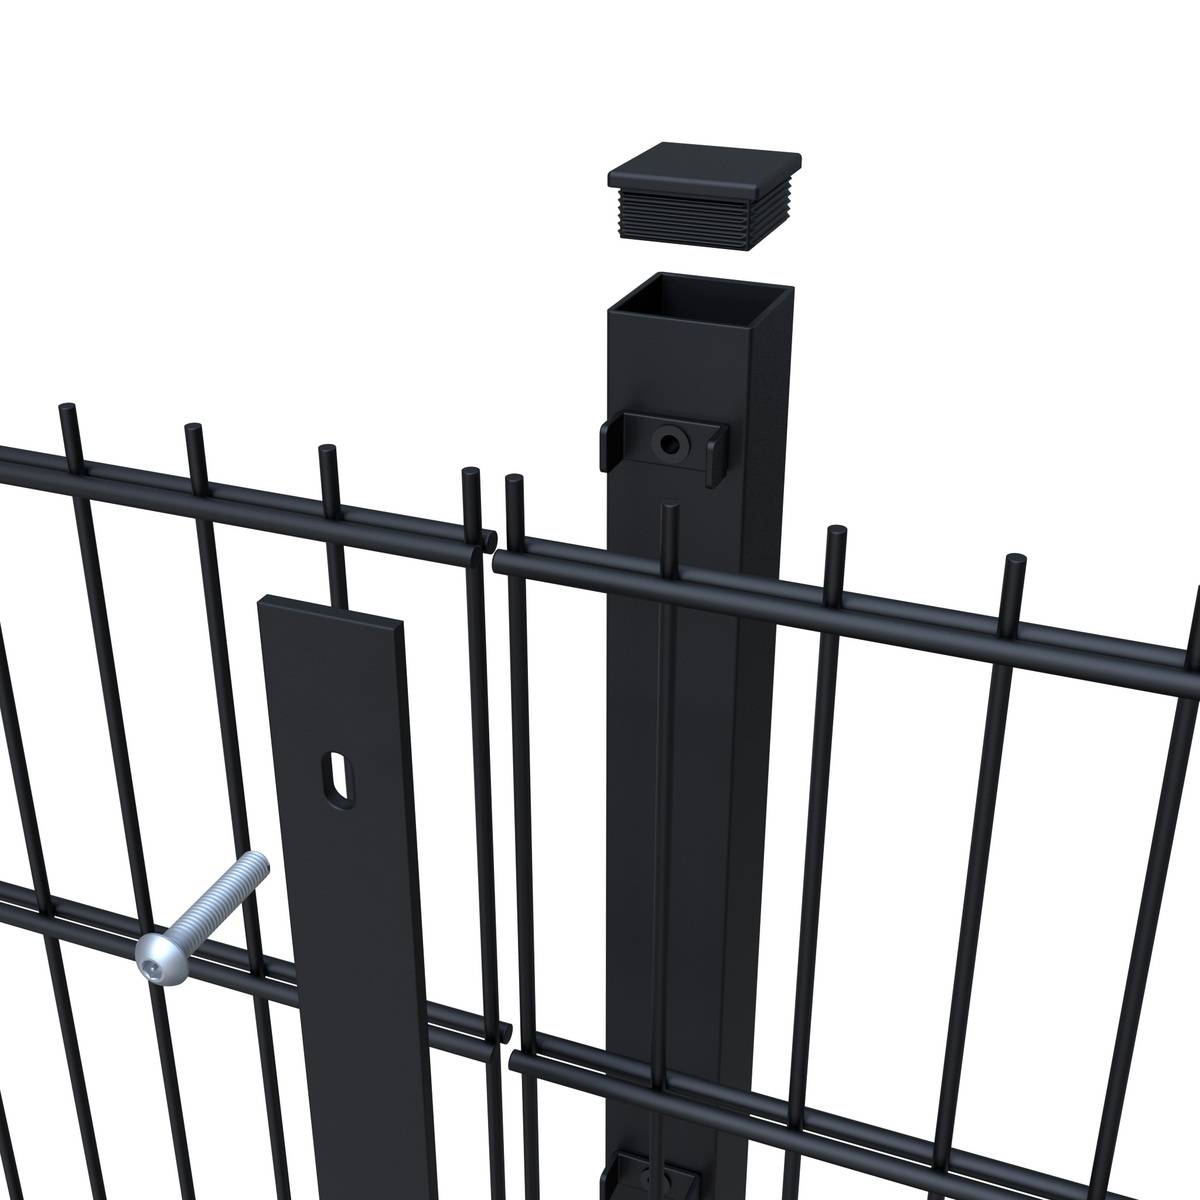 Imperium-1-868™ | SR1 (A1) Twin Wire Security Fence